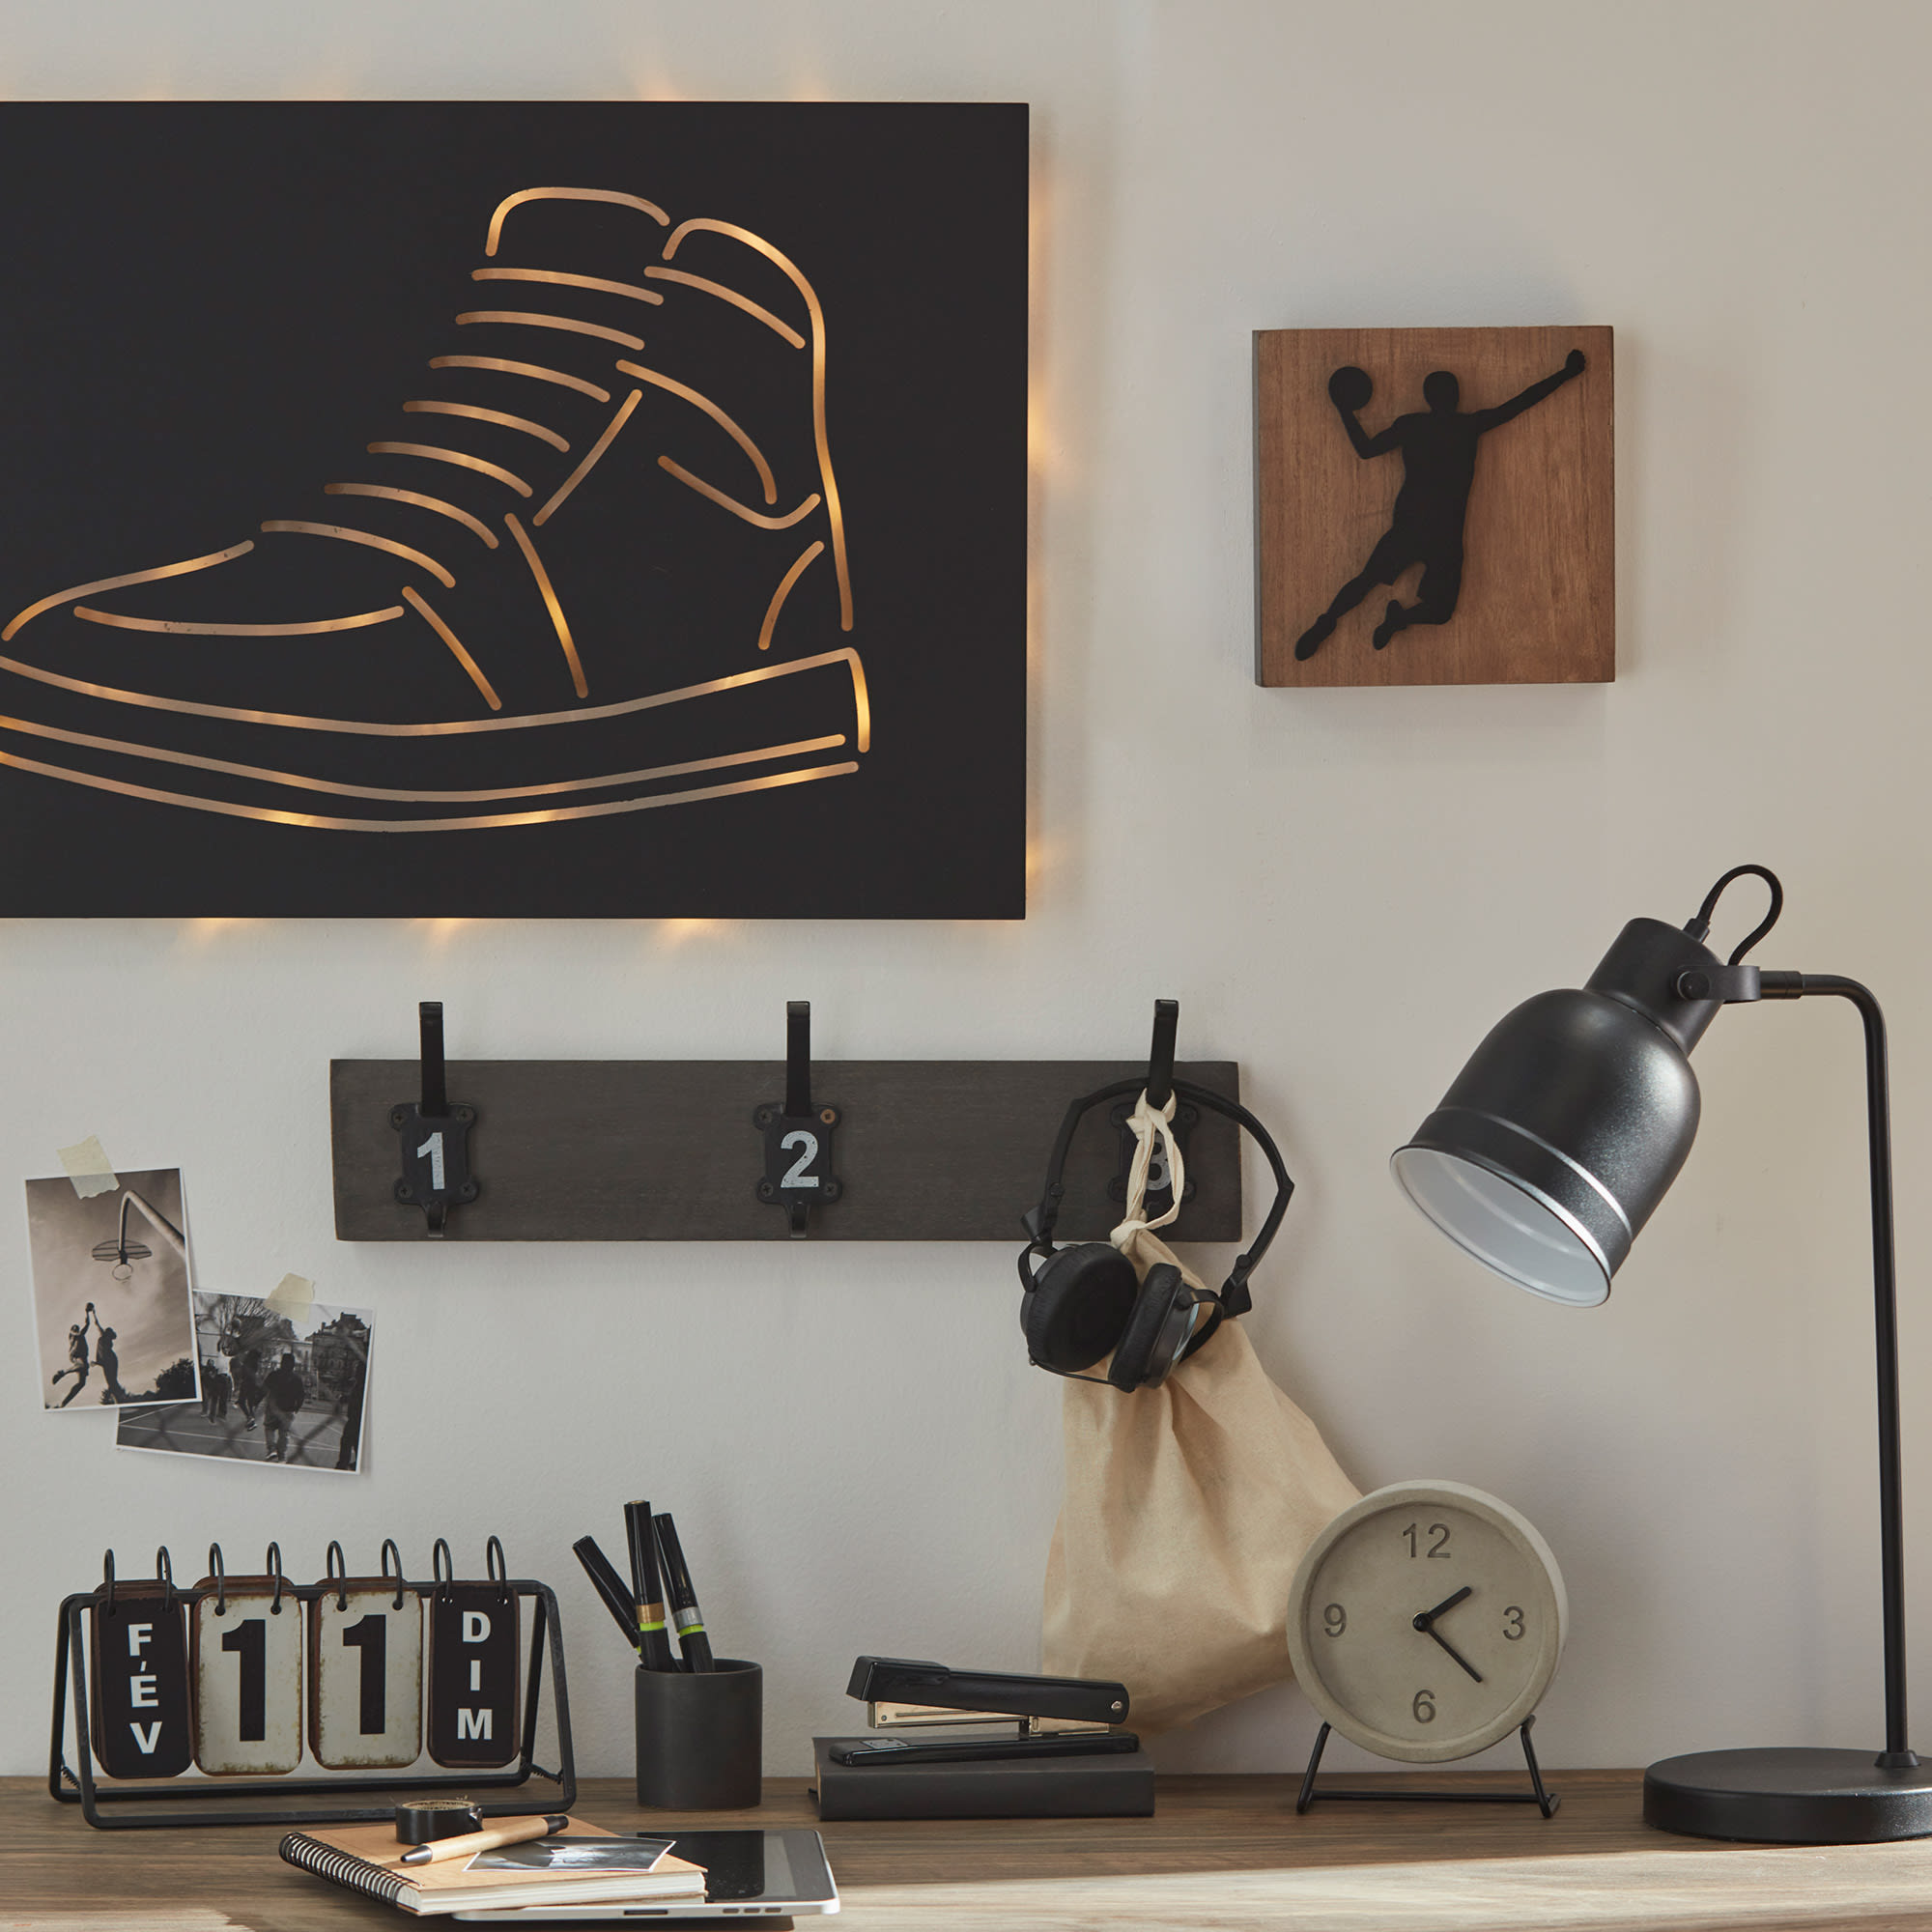 Small 3D Wall Art with Basketball Silhouette